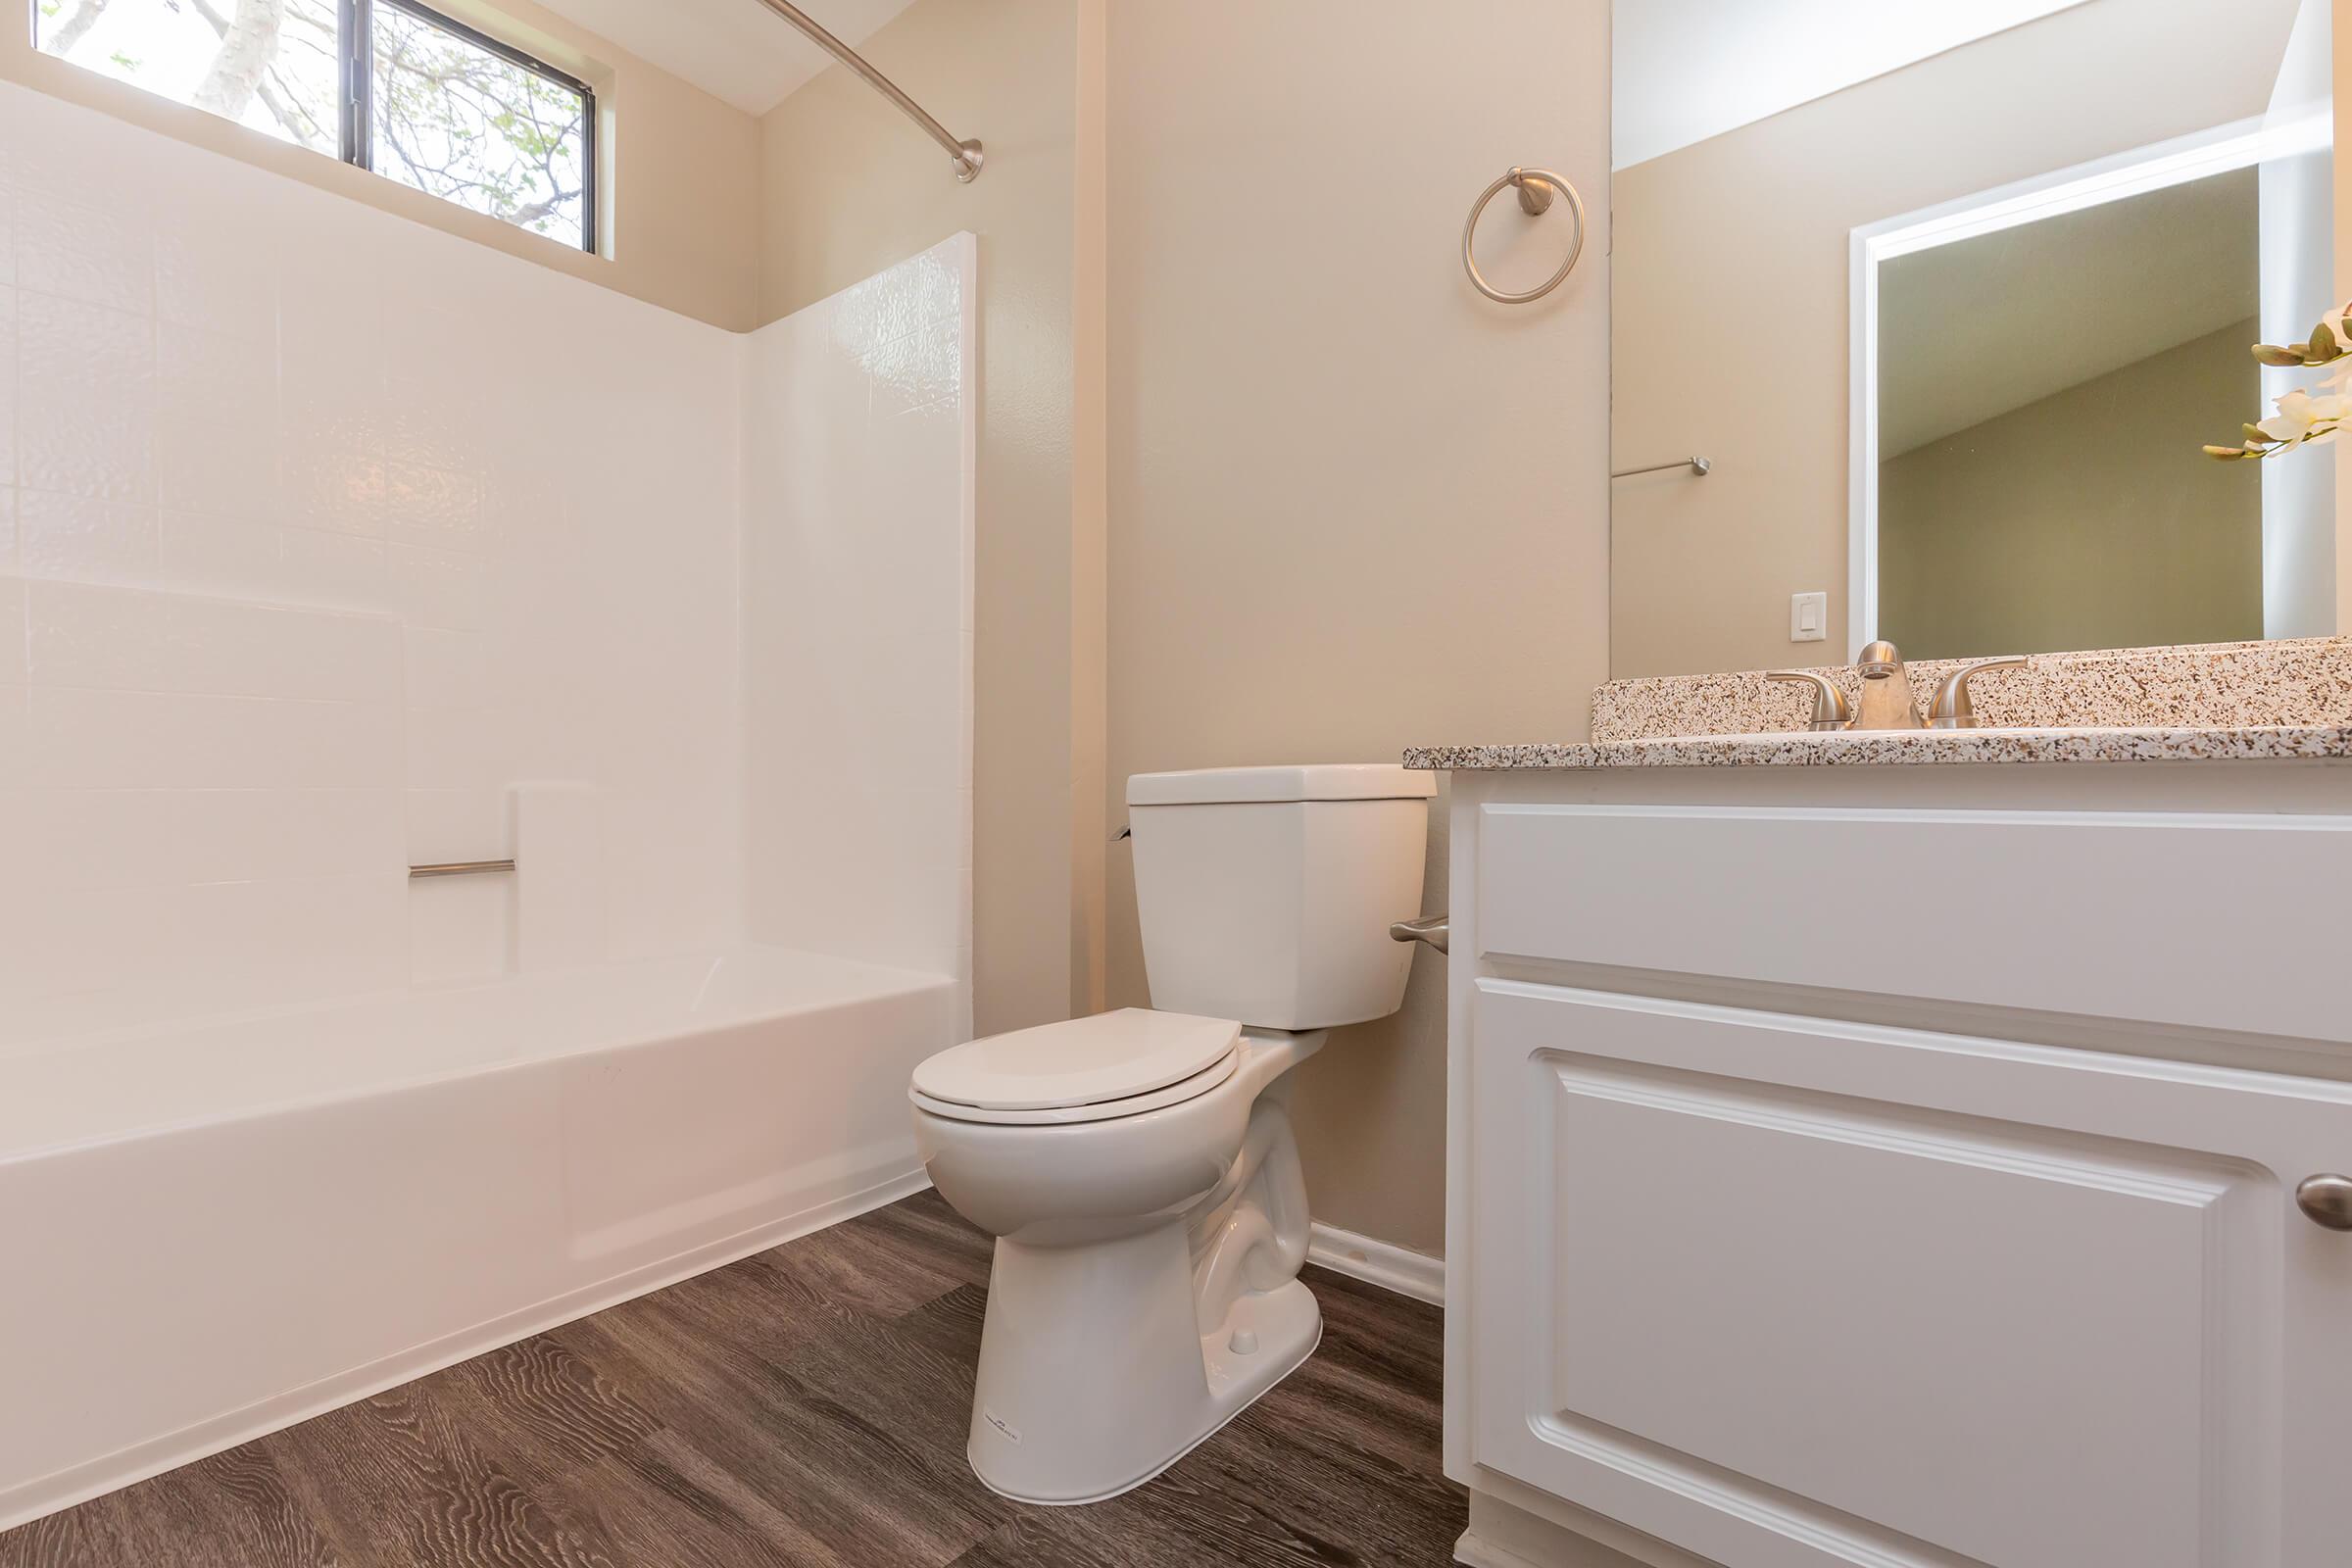 Unfurnished bathroom with wooden floors